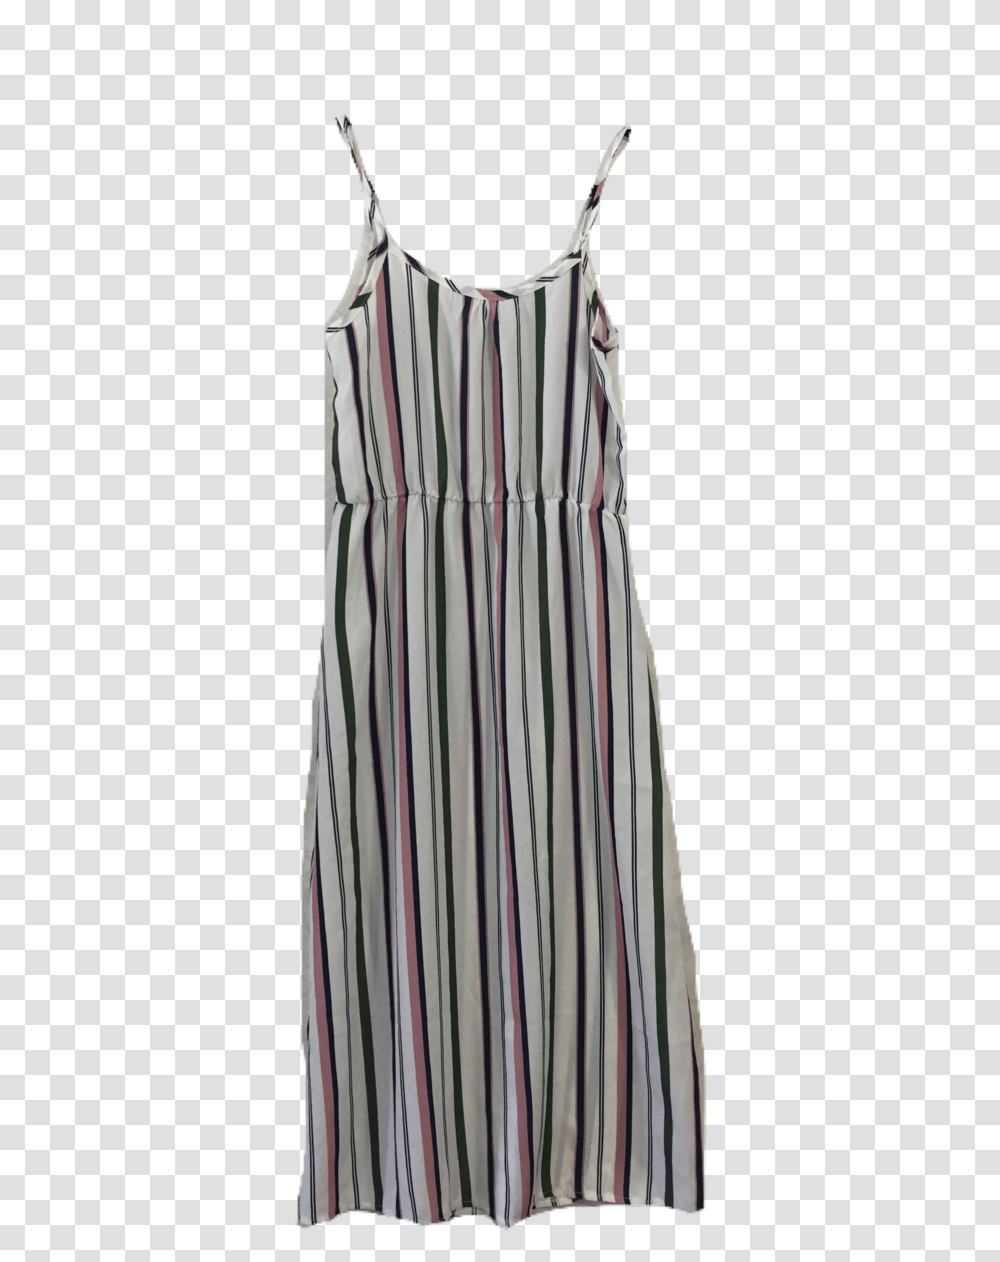 The Staple Dress I Am Using Is The Striped Cami Dress Cocktail Dress, Apparel, Apron, Skirt Transparent Png